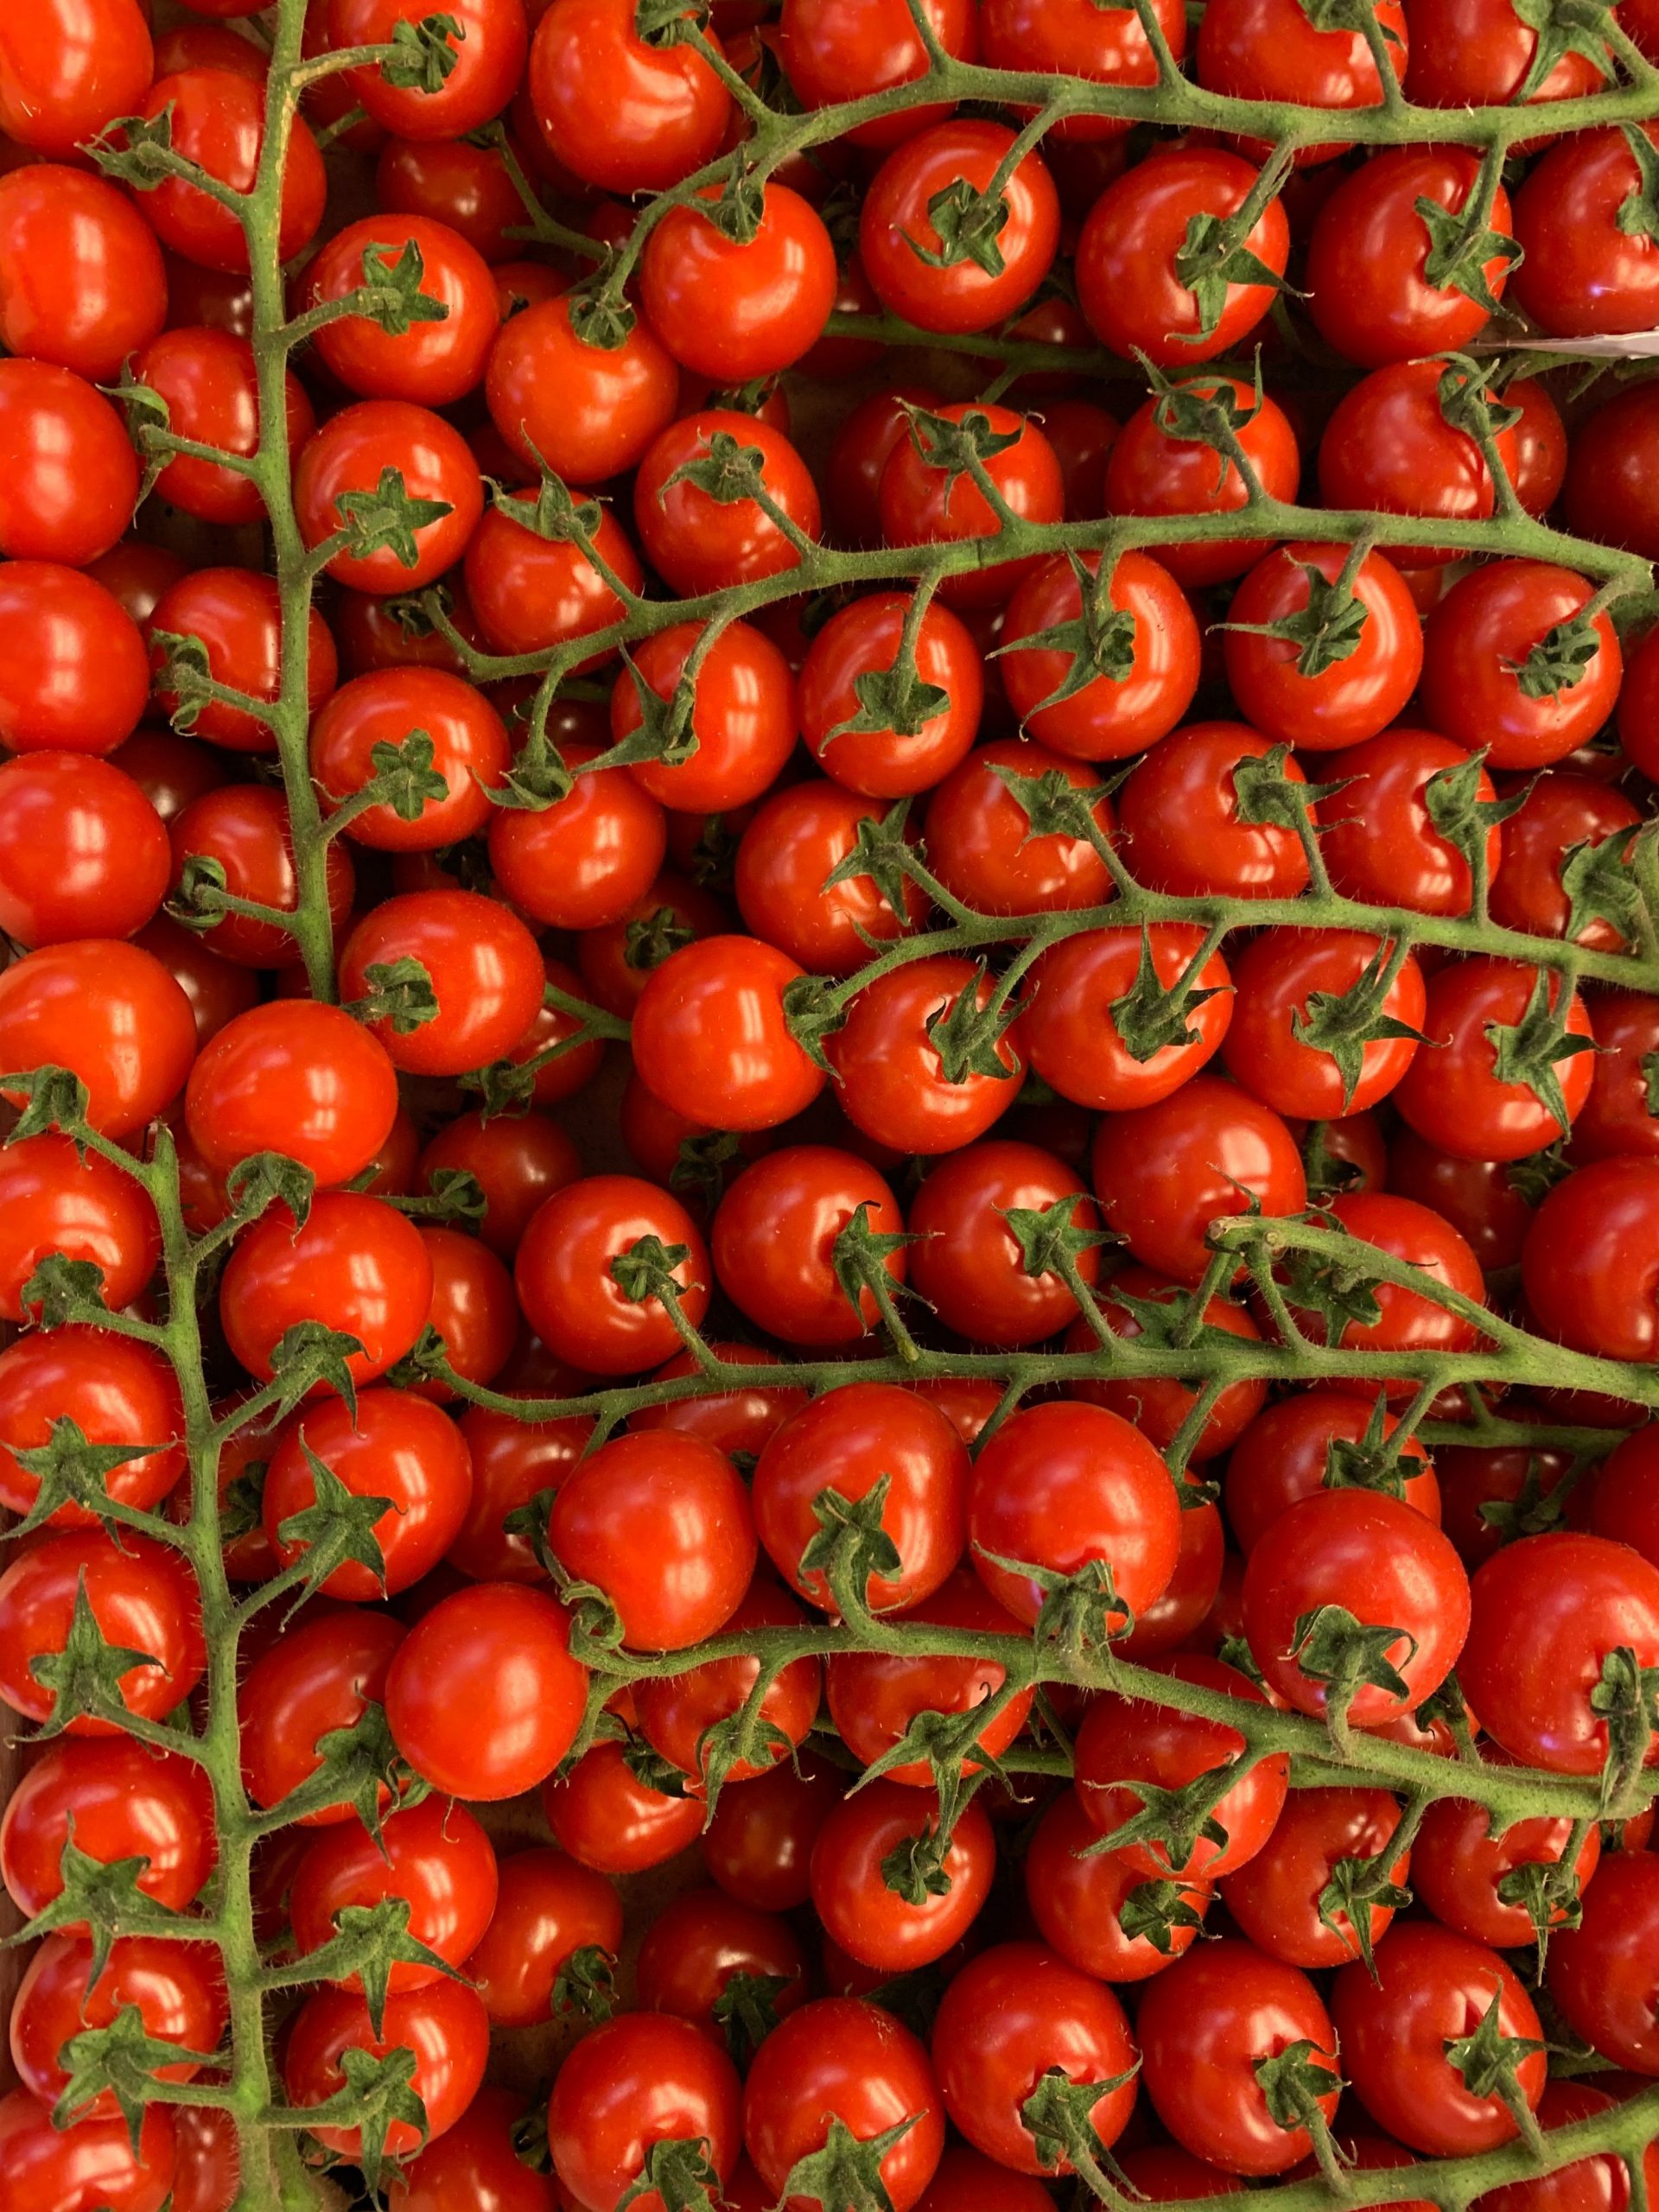 Tomato price rise: 5 Ingredients to substitute for tomatoes